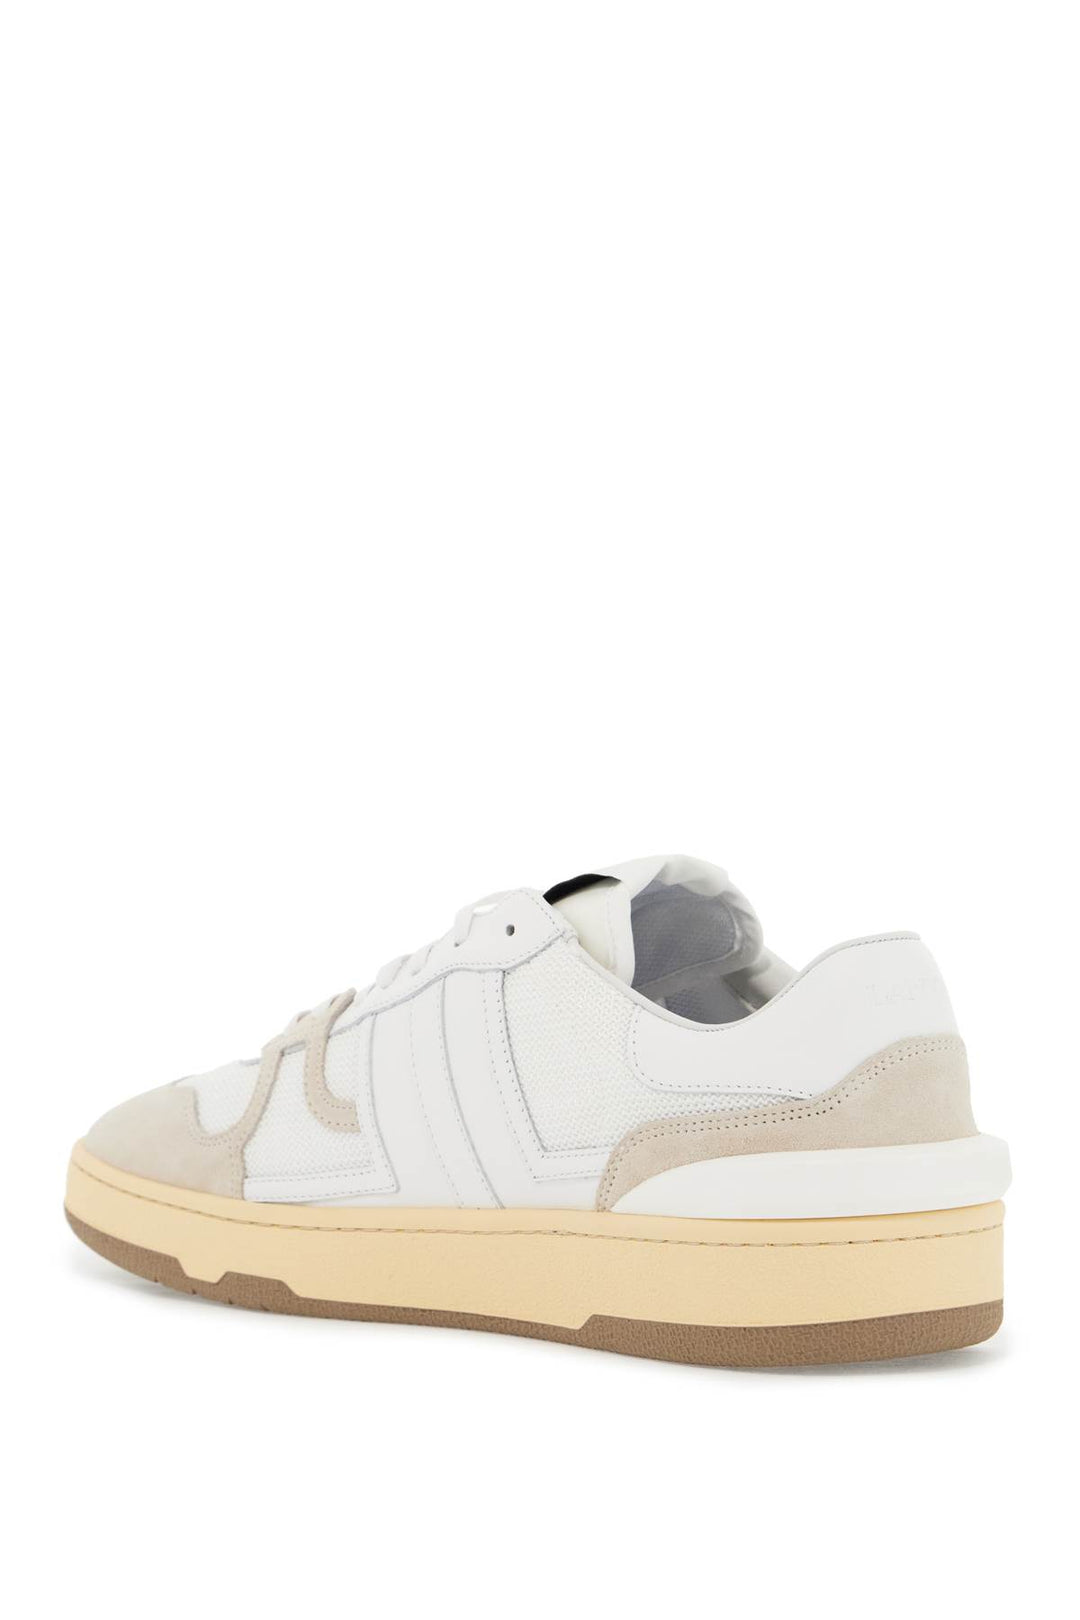 Lanvin Mesh And Leather Clay Sneakers With   White